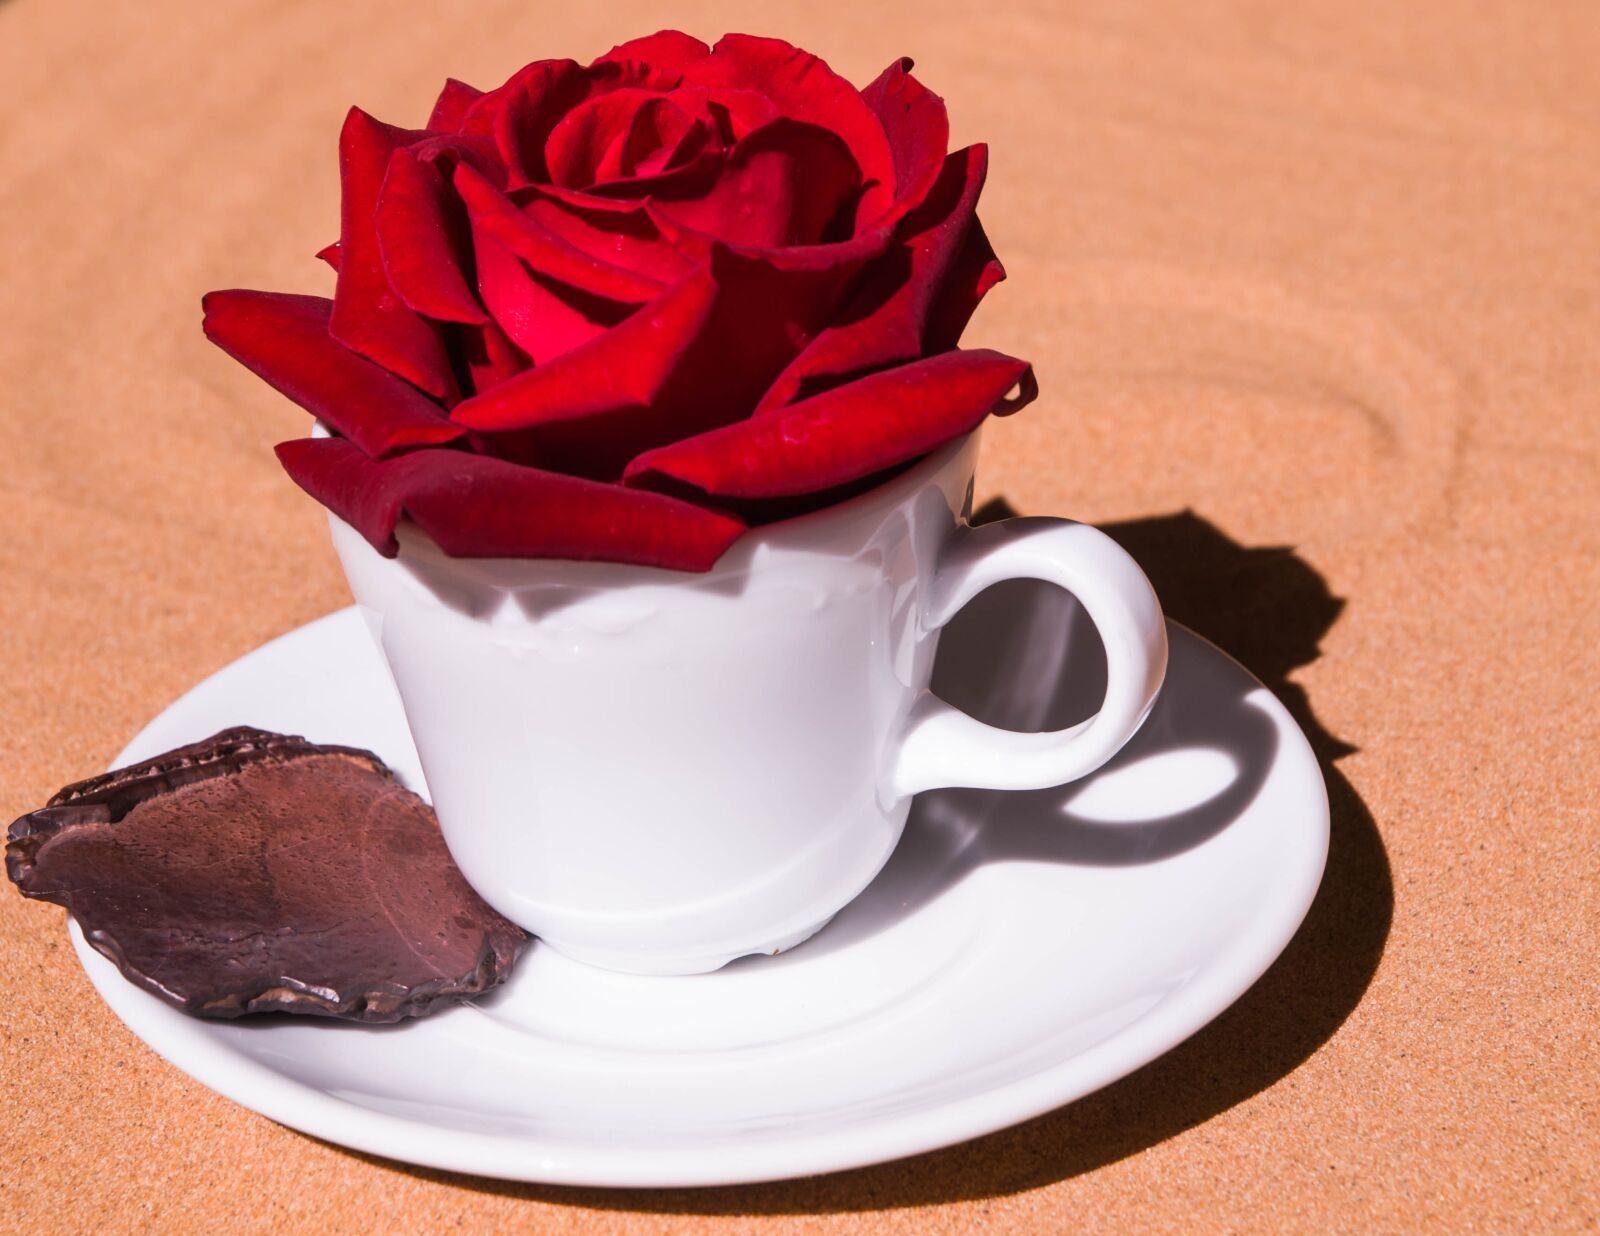 Olympus E-3 sample photo. Rose, cup, romantic photography